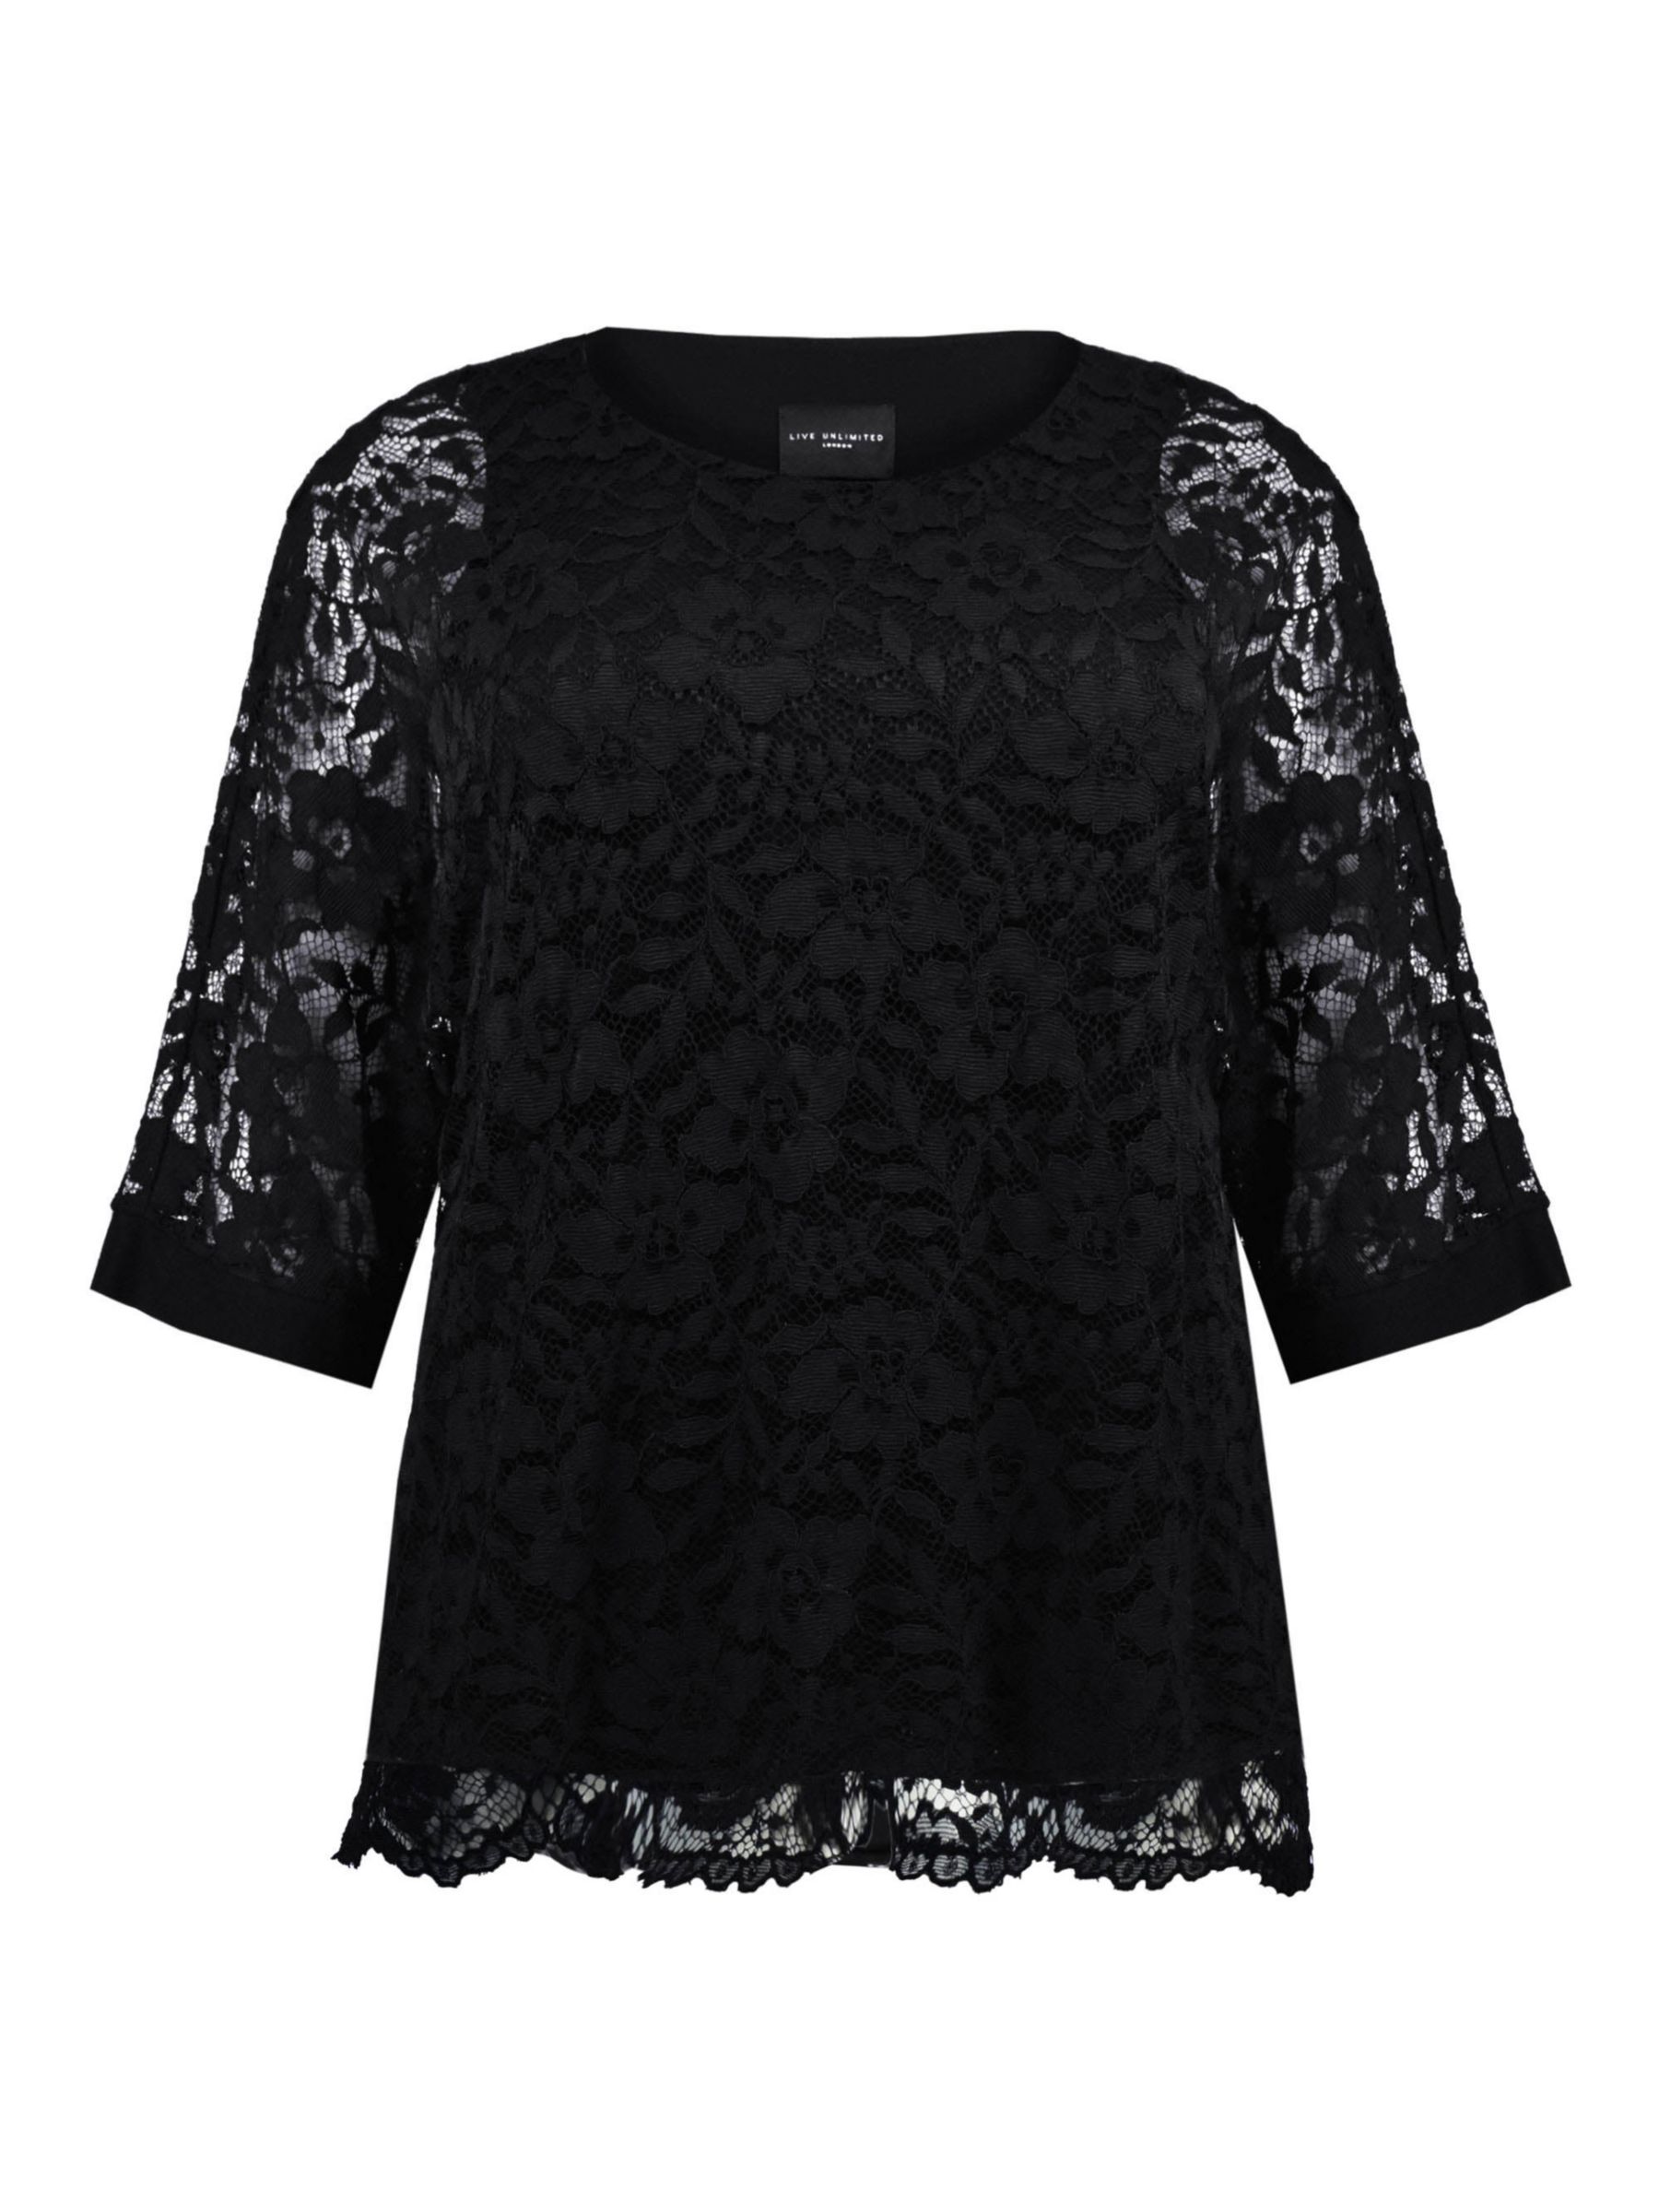 Live Unlimited Lace Overlay Blouse, Black at John Lewis & Partners